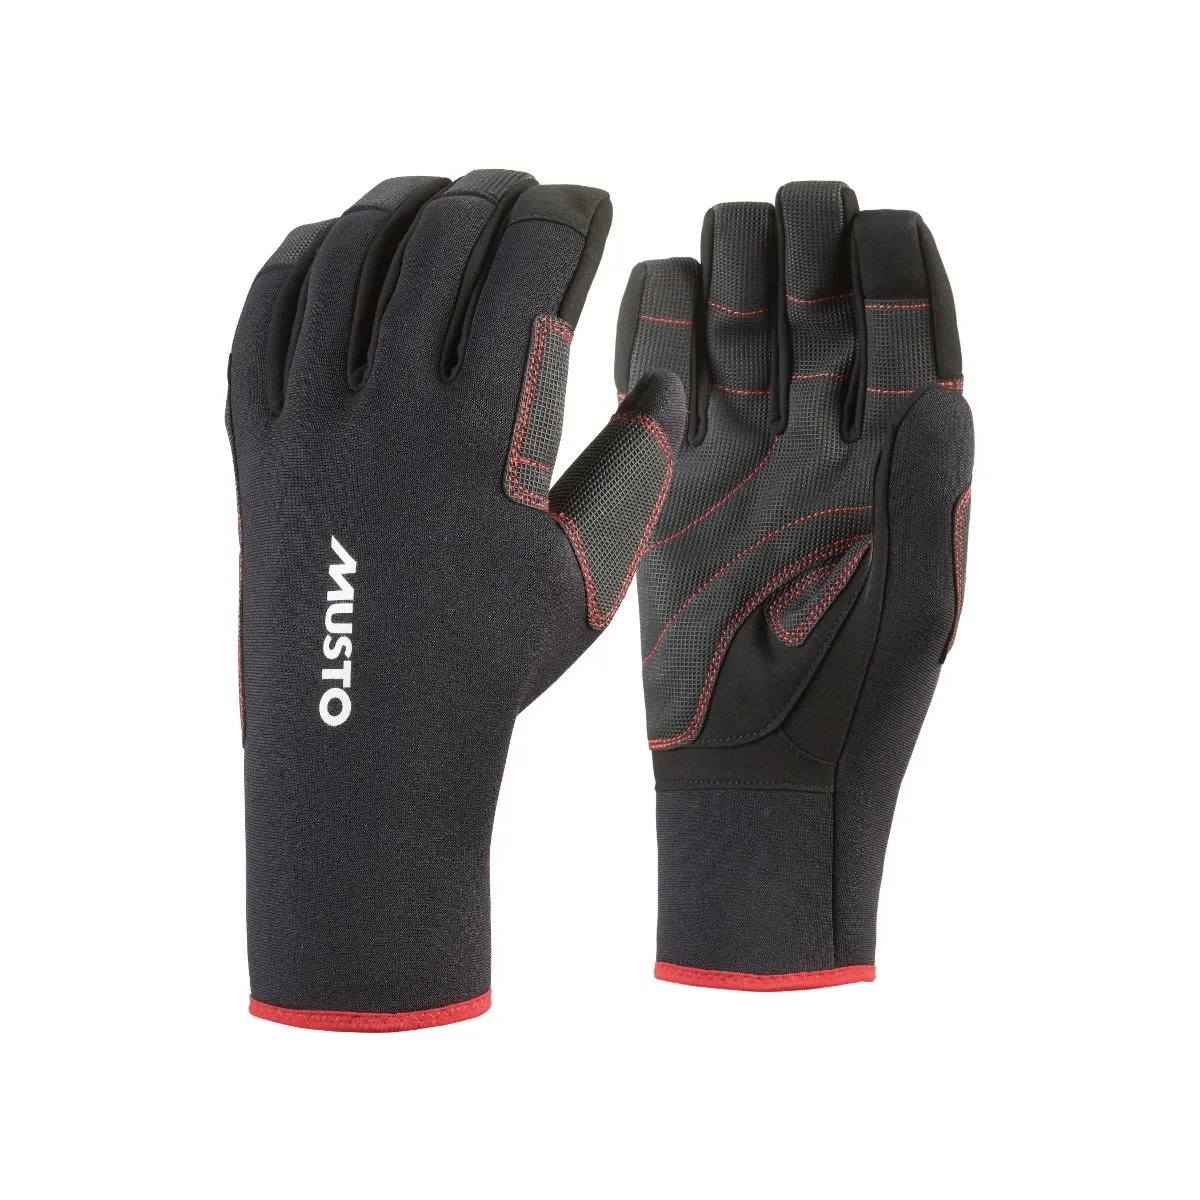 Musto PMusto Performance All Weather Gloveserformance All Weather Gloves